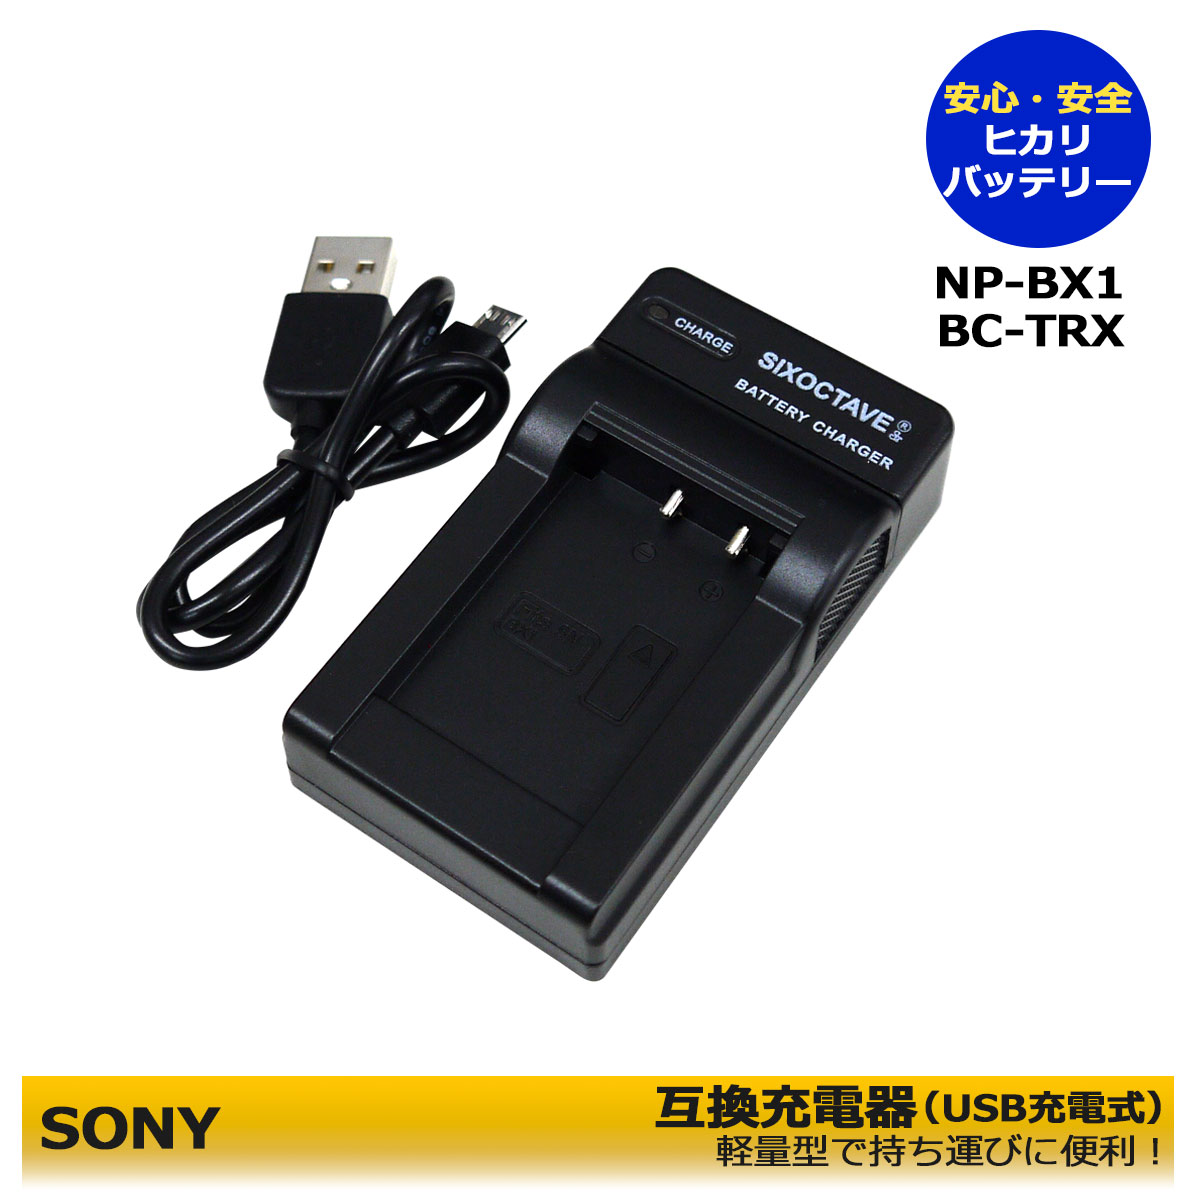 NP-BX1　<strong>SONY</strong> 【送料無料】　互換充電器　（USB充電式）　HDR-AS15 / HDR-AS30V / HDR-AS30VR / HDR-AS50 / HDR-AS50R / HDR-AS100V / HDR-AS100VR / HDR-AS200V / HDR-AS300 / HDR-AS300R（FDR-X　シリーズ） / FDR-X1000V / FDR-X1000VR / ZV-1 II /ZV-1M2